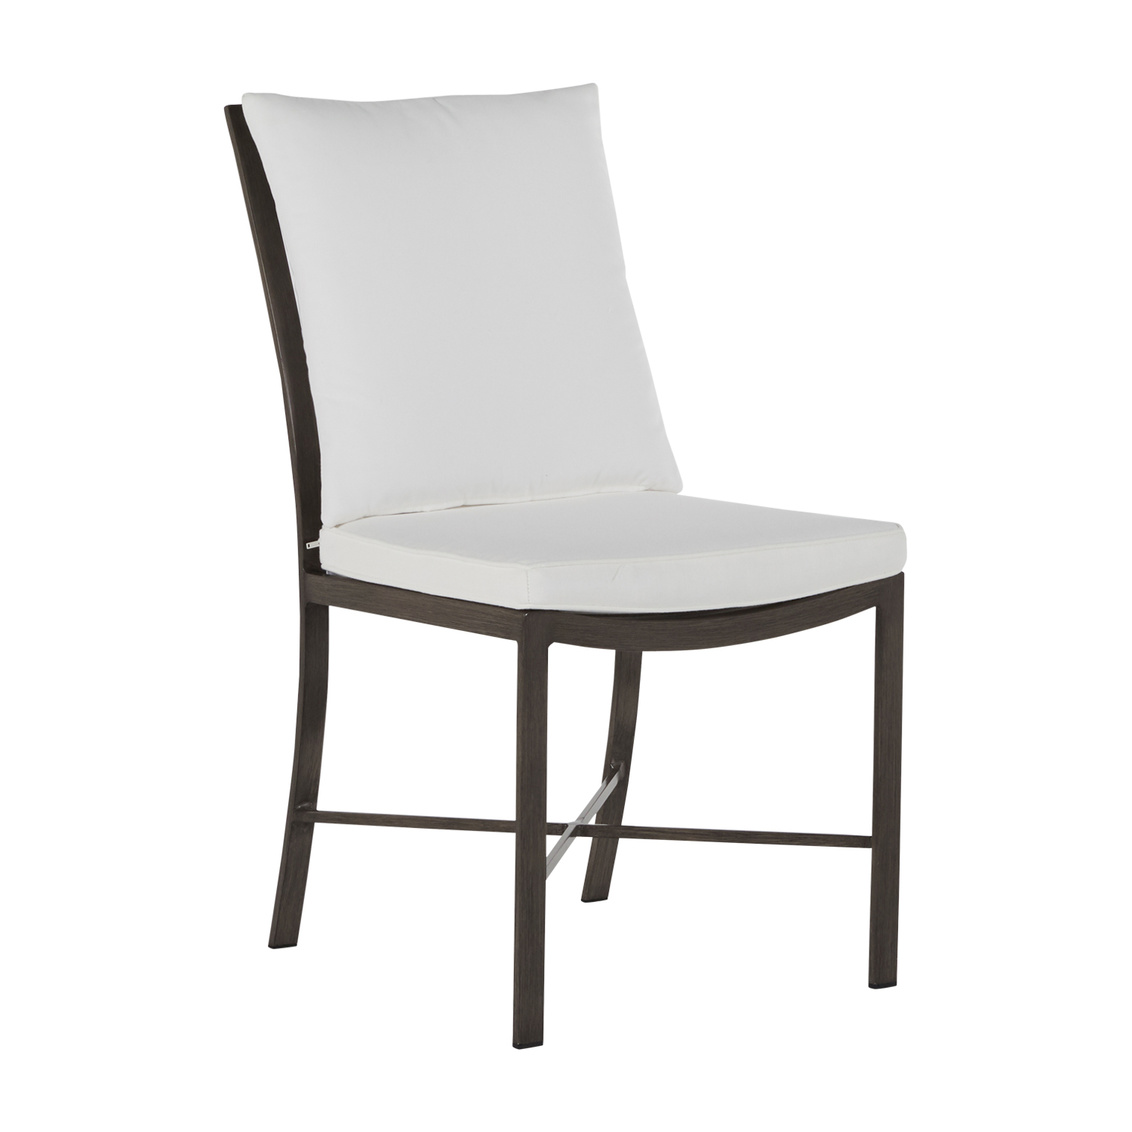 monaco aluminum side chair in slate grey – frame only product image